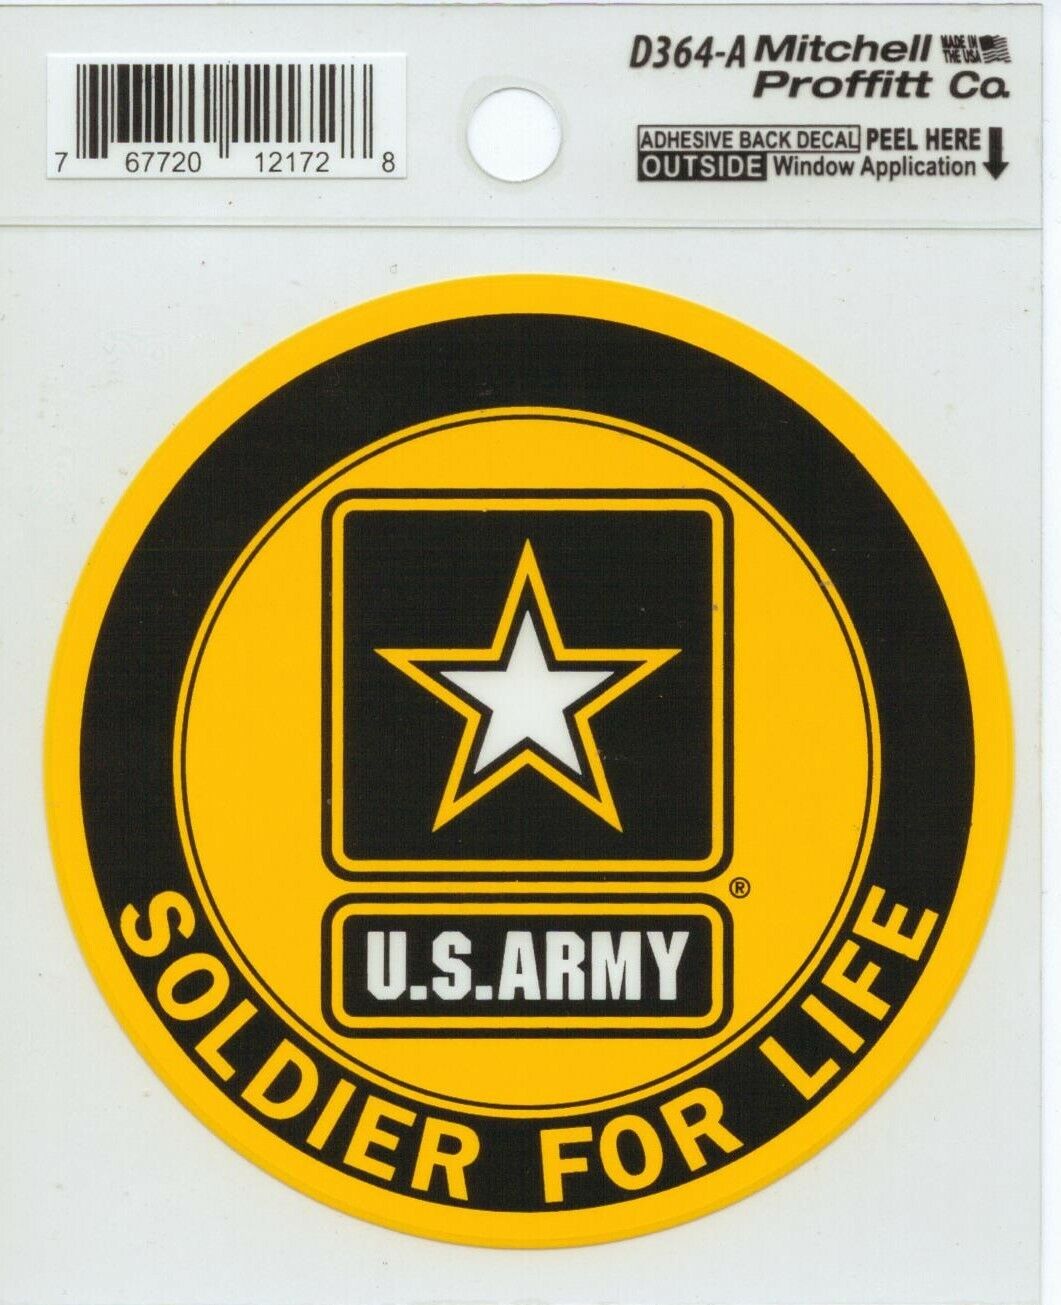 US ARMY SOLDIER FOR LIFE DECAL STICKER - MADE IN THE USA - 1 DAY HANDLING